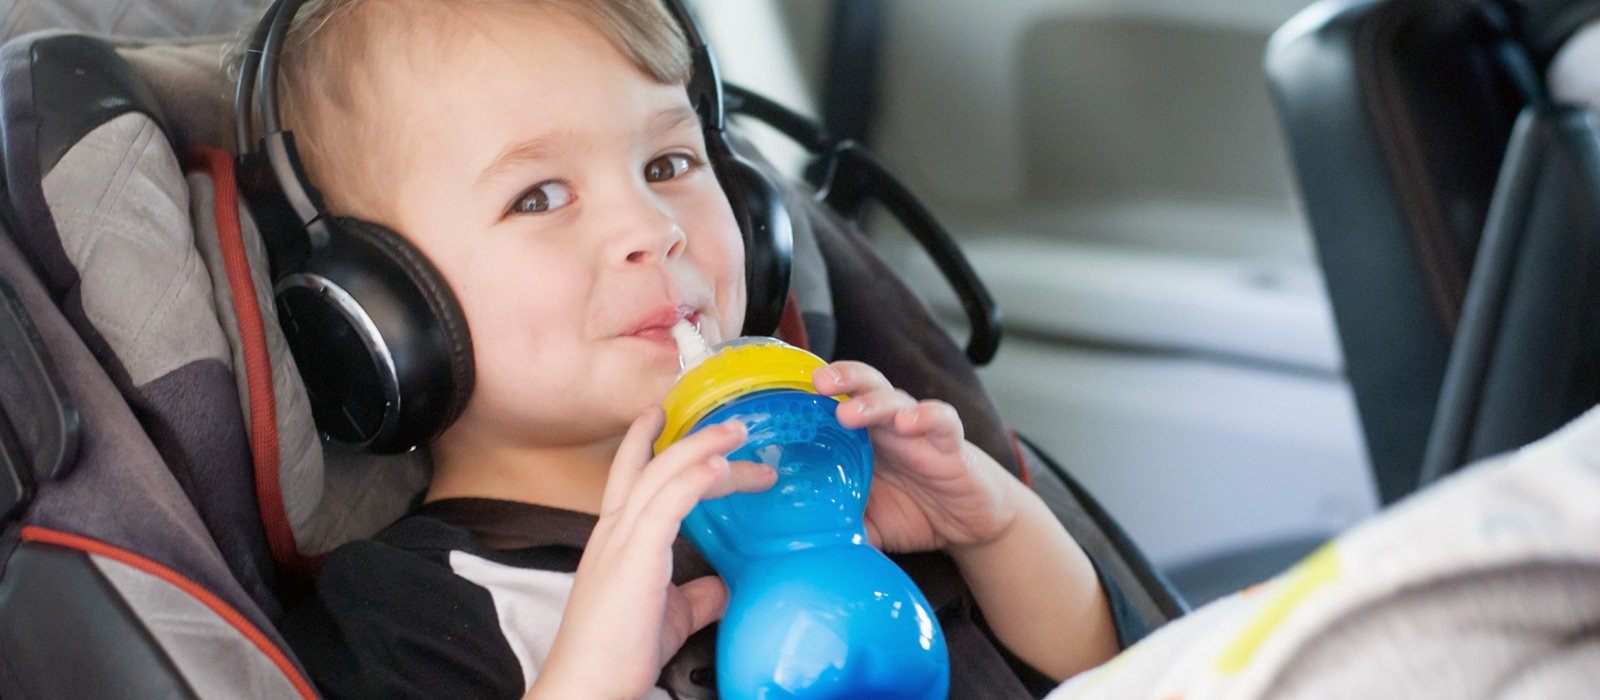 toddler drinking from Nuby cup in car